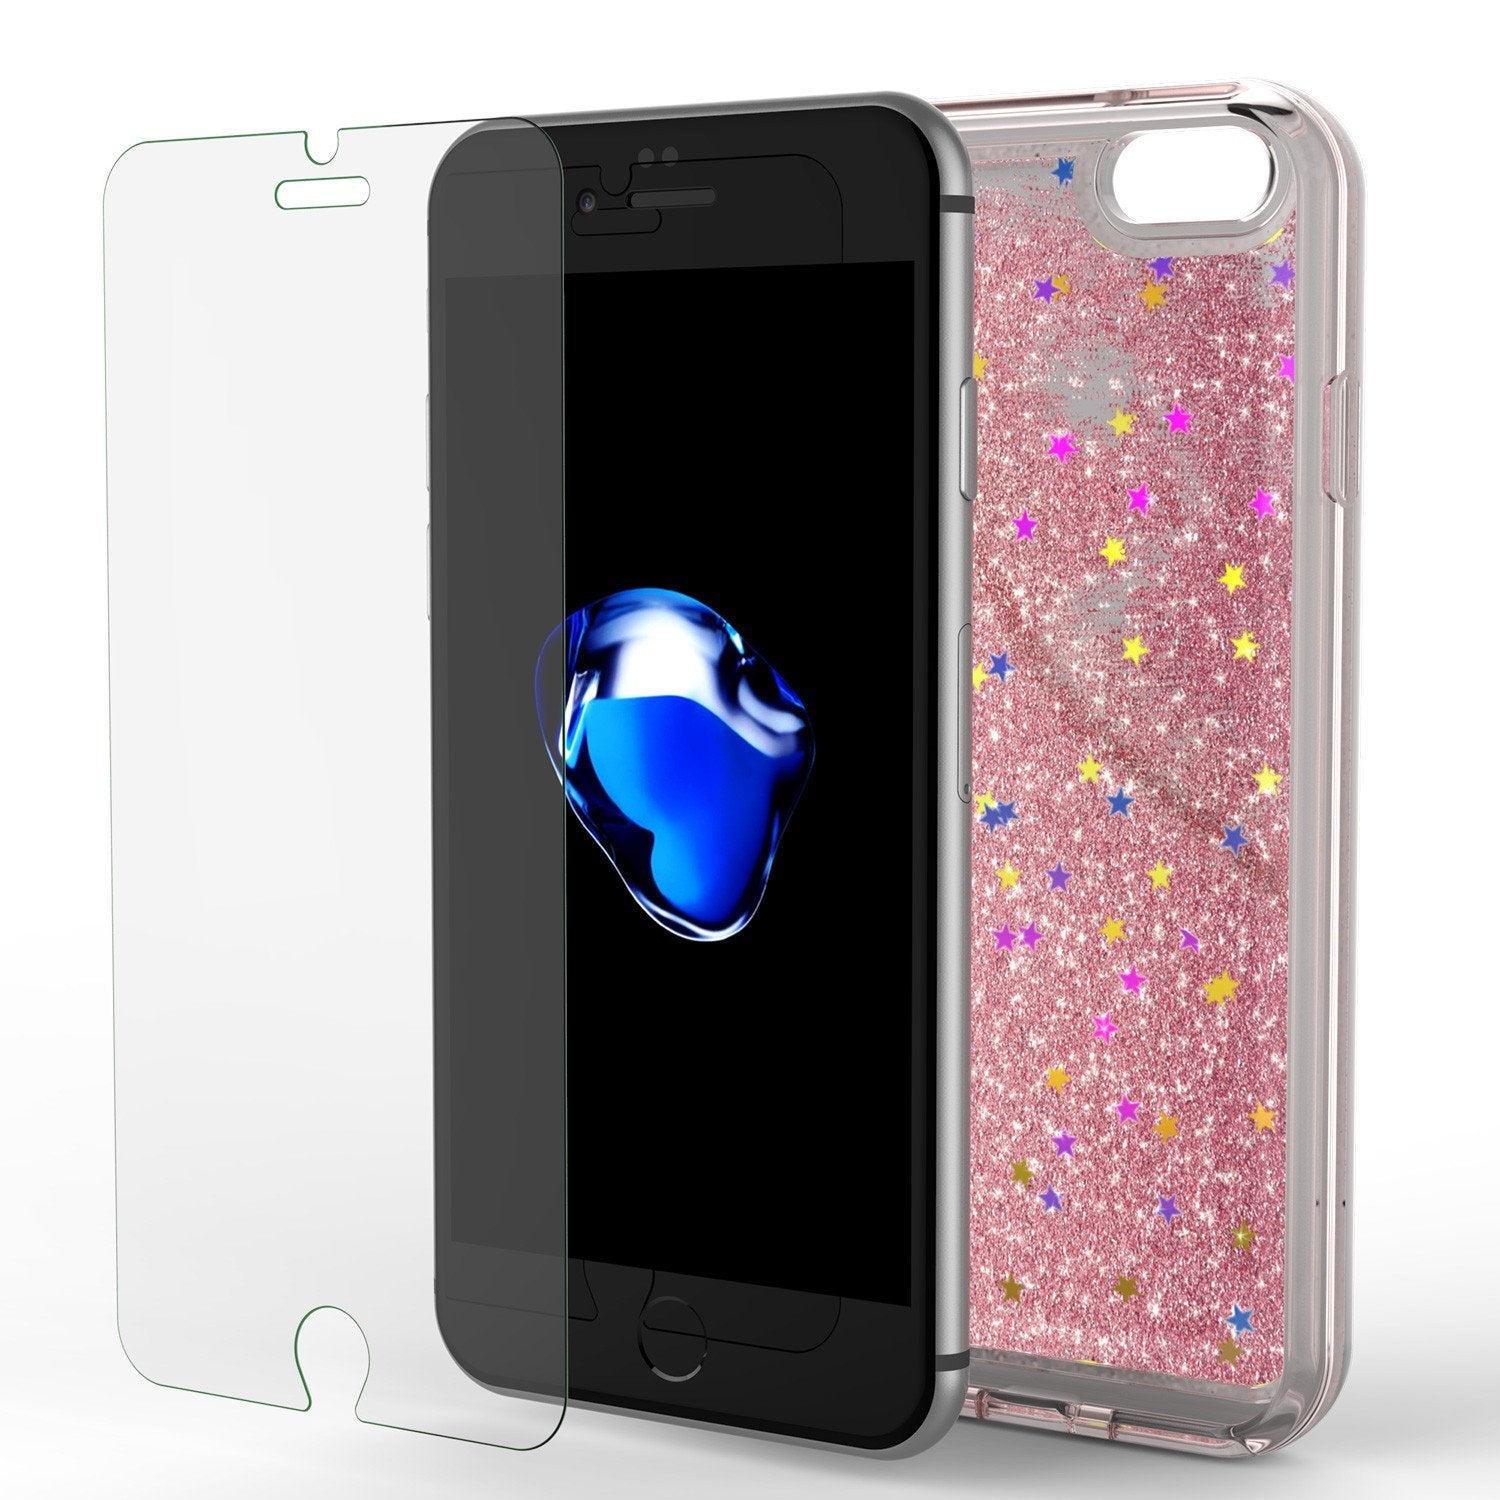 iPhone 8 Case, PunkCase LIQUID Rose Series, Protective Dual Layer Floating Glitter Cover